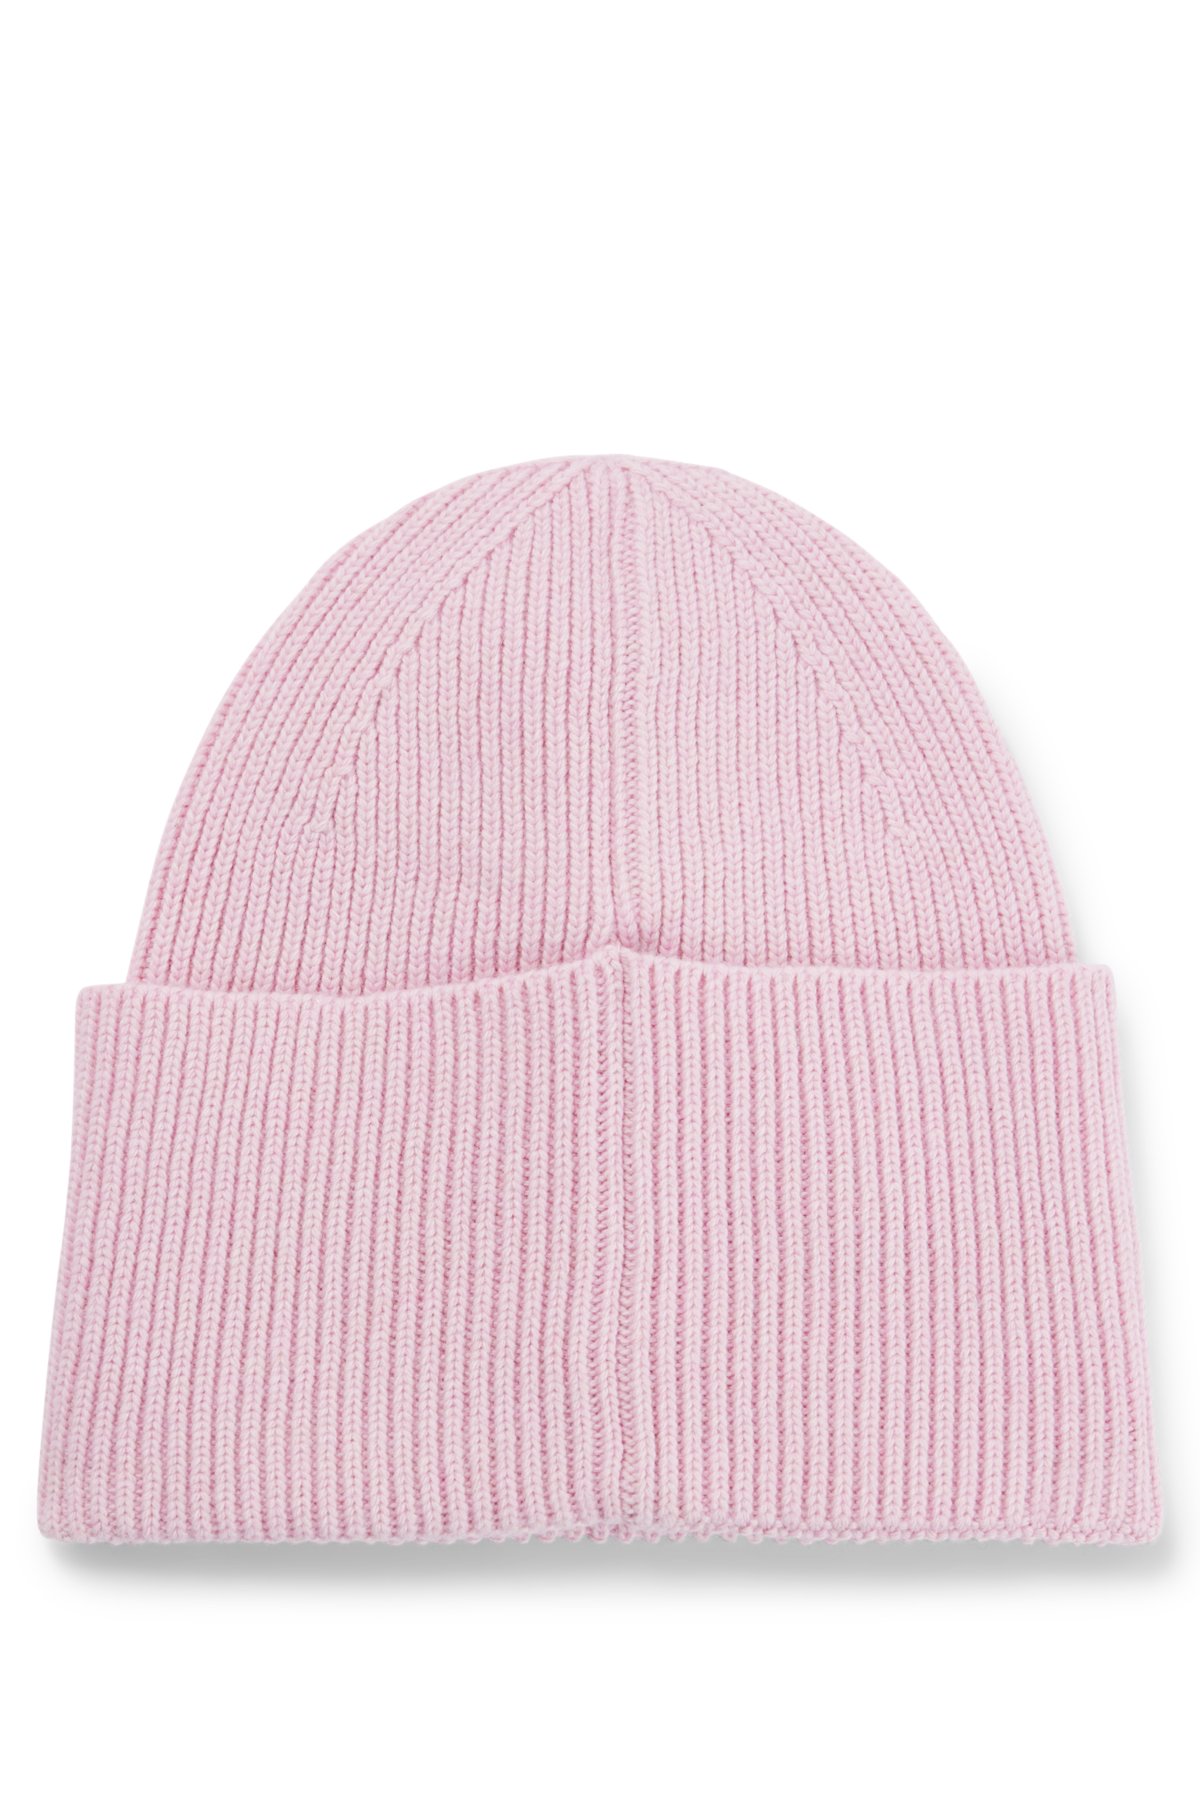 HUGO - Wool-blend logo beanie label with hat red